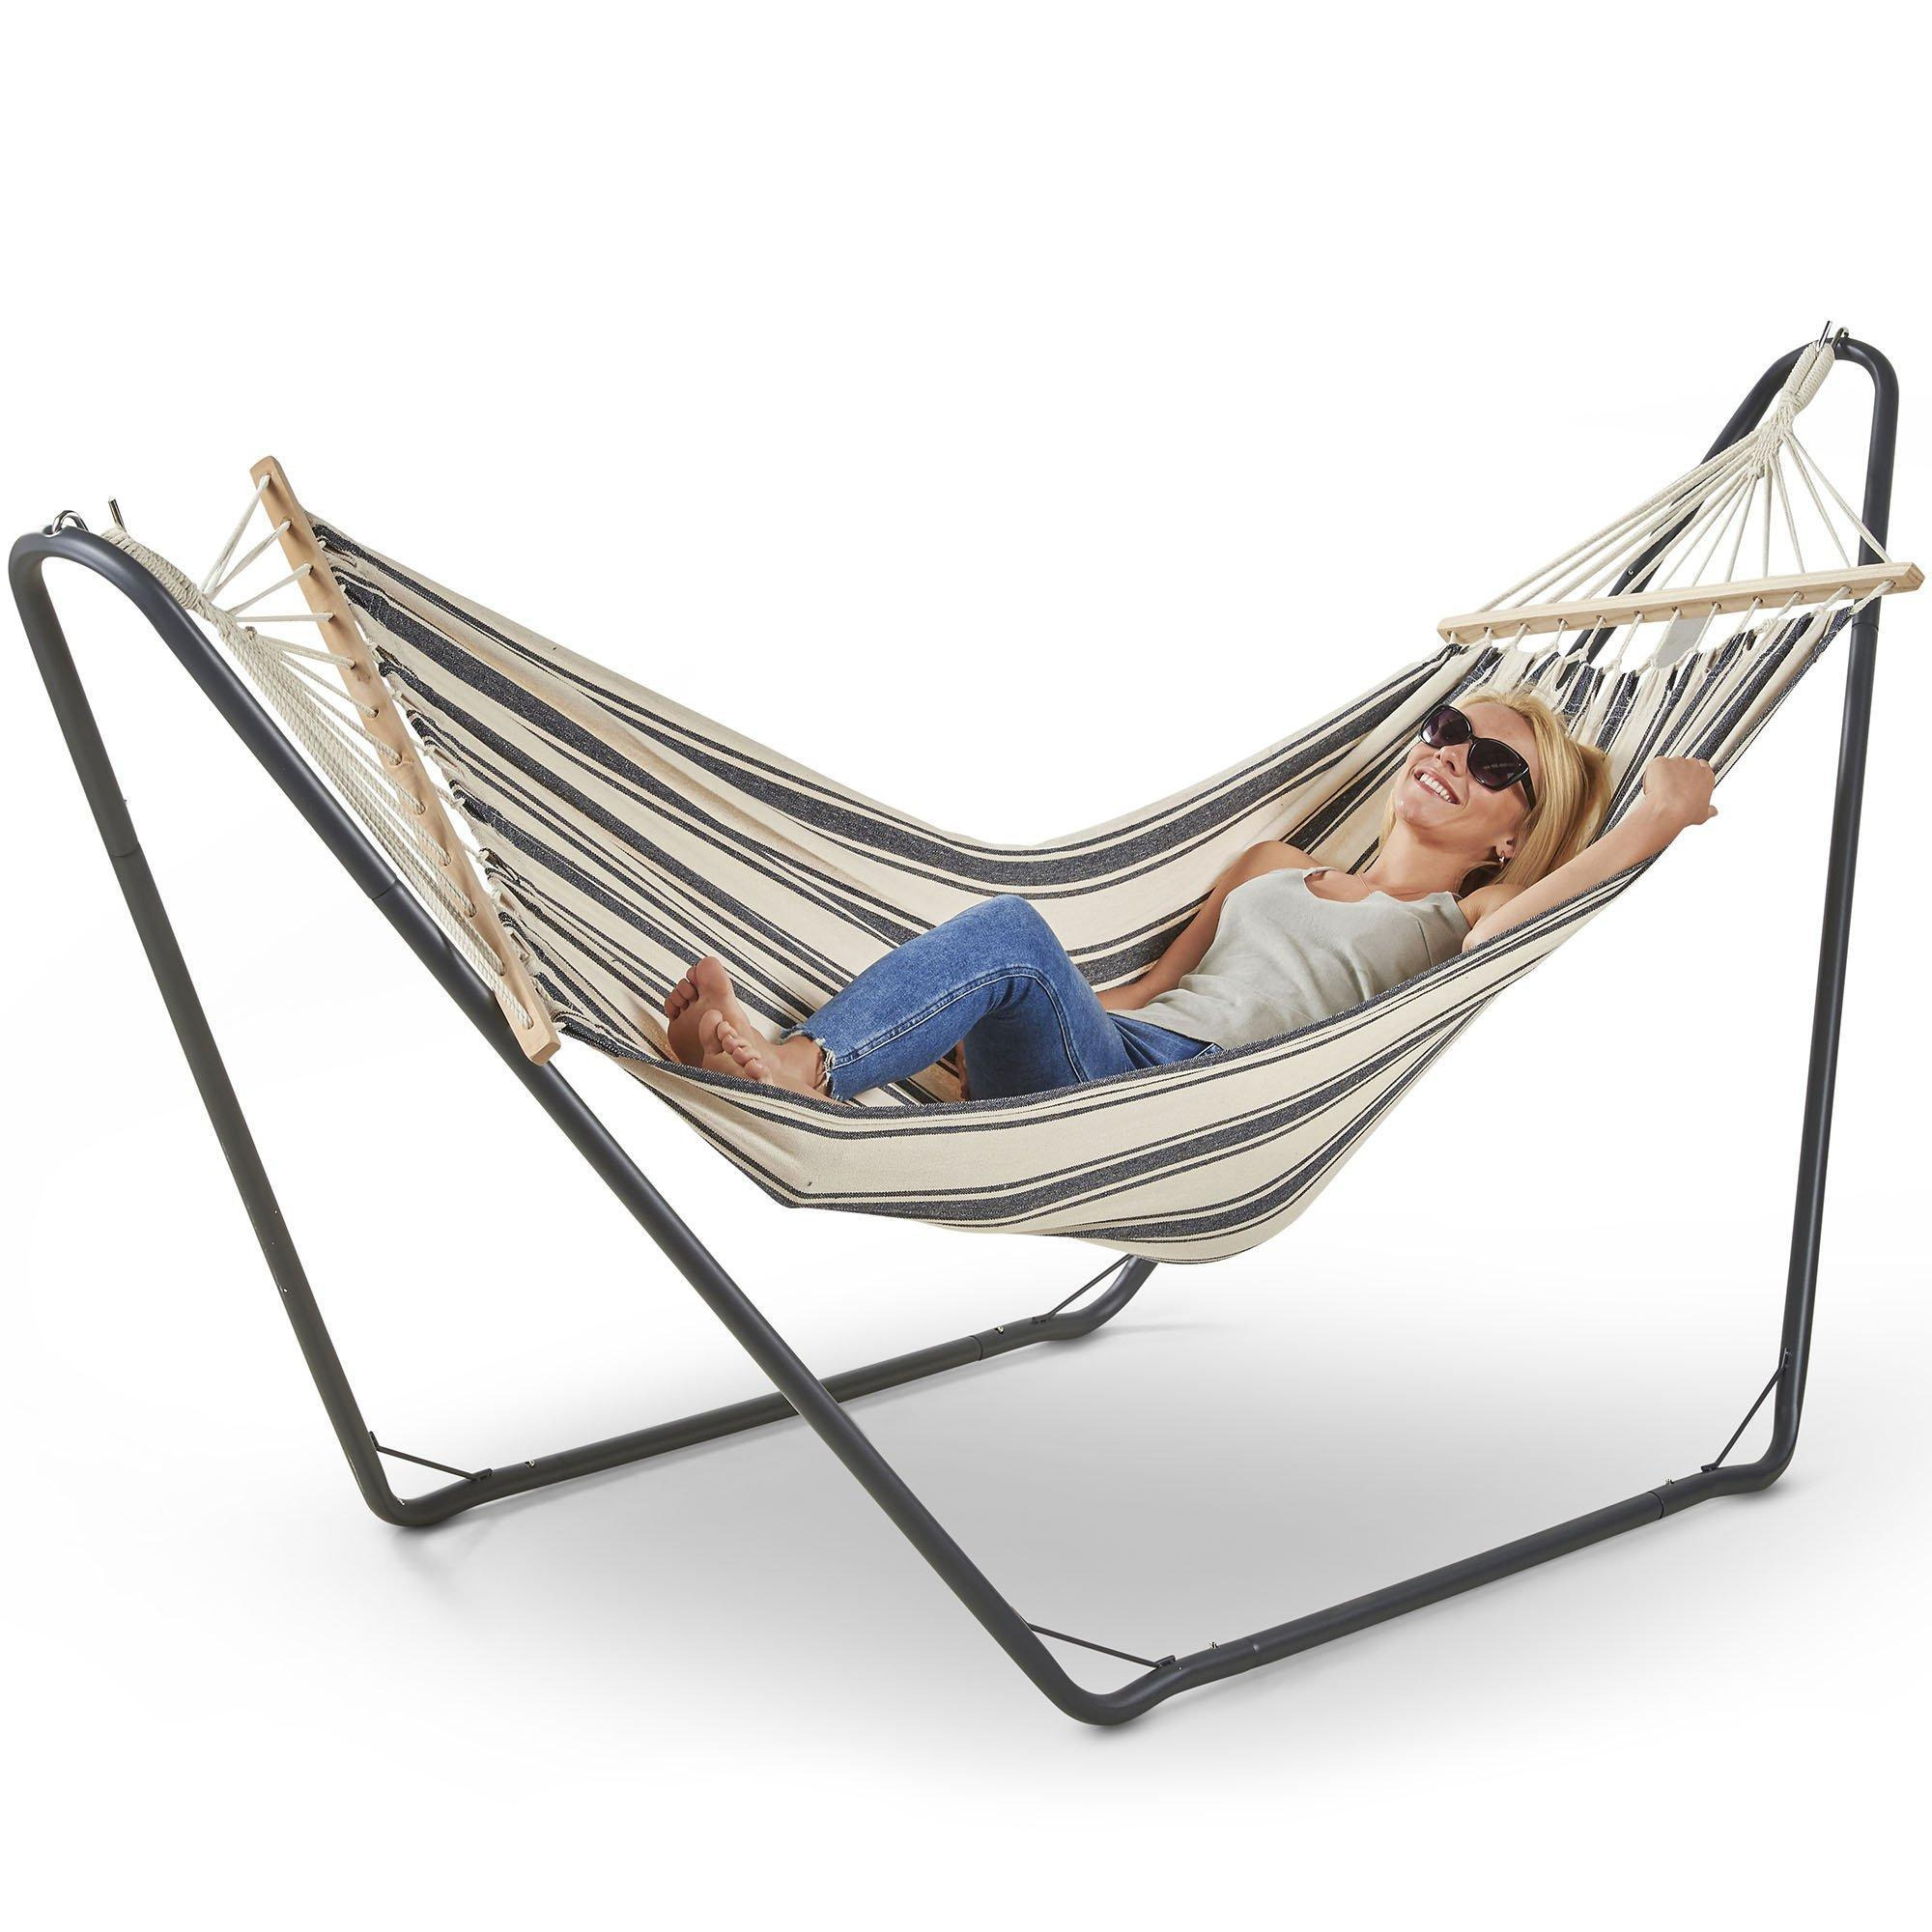 Freestanding Camping Patio and Garden Hammock with Frame - image 1